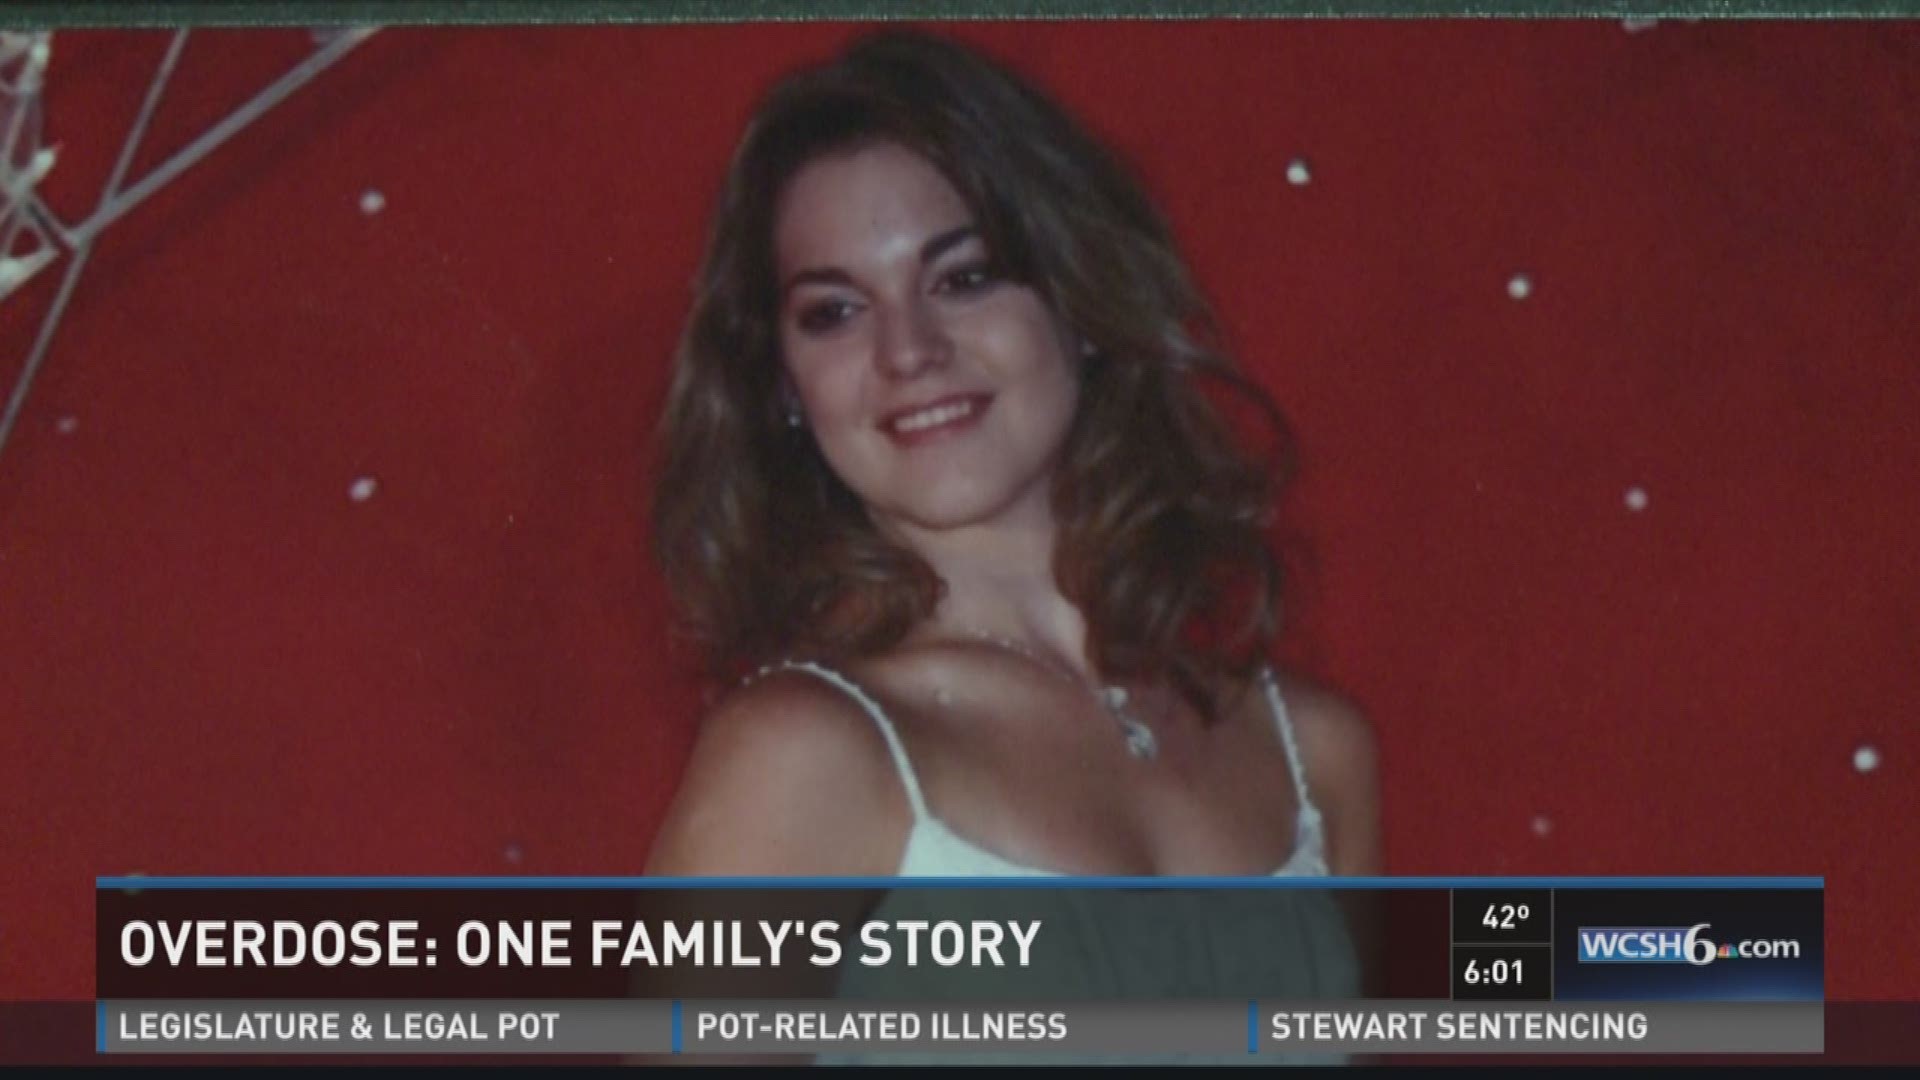 Overdose: one family's story